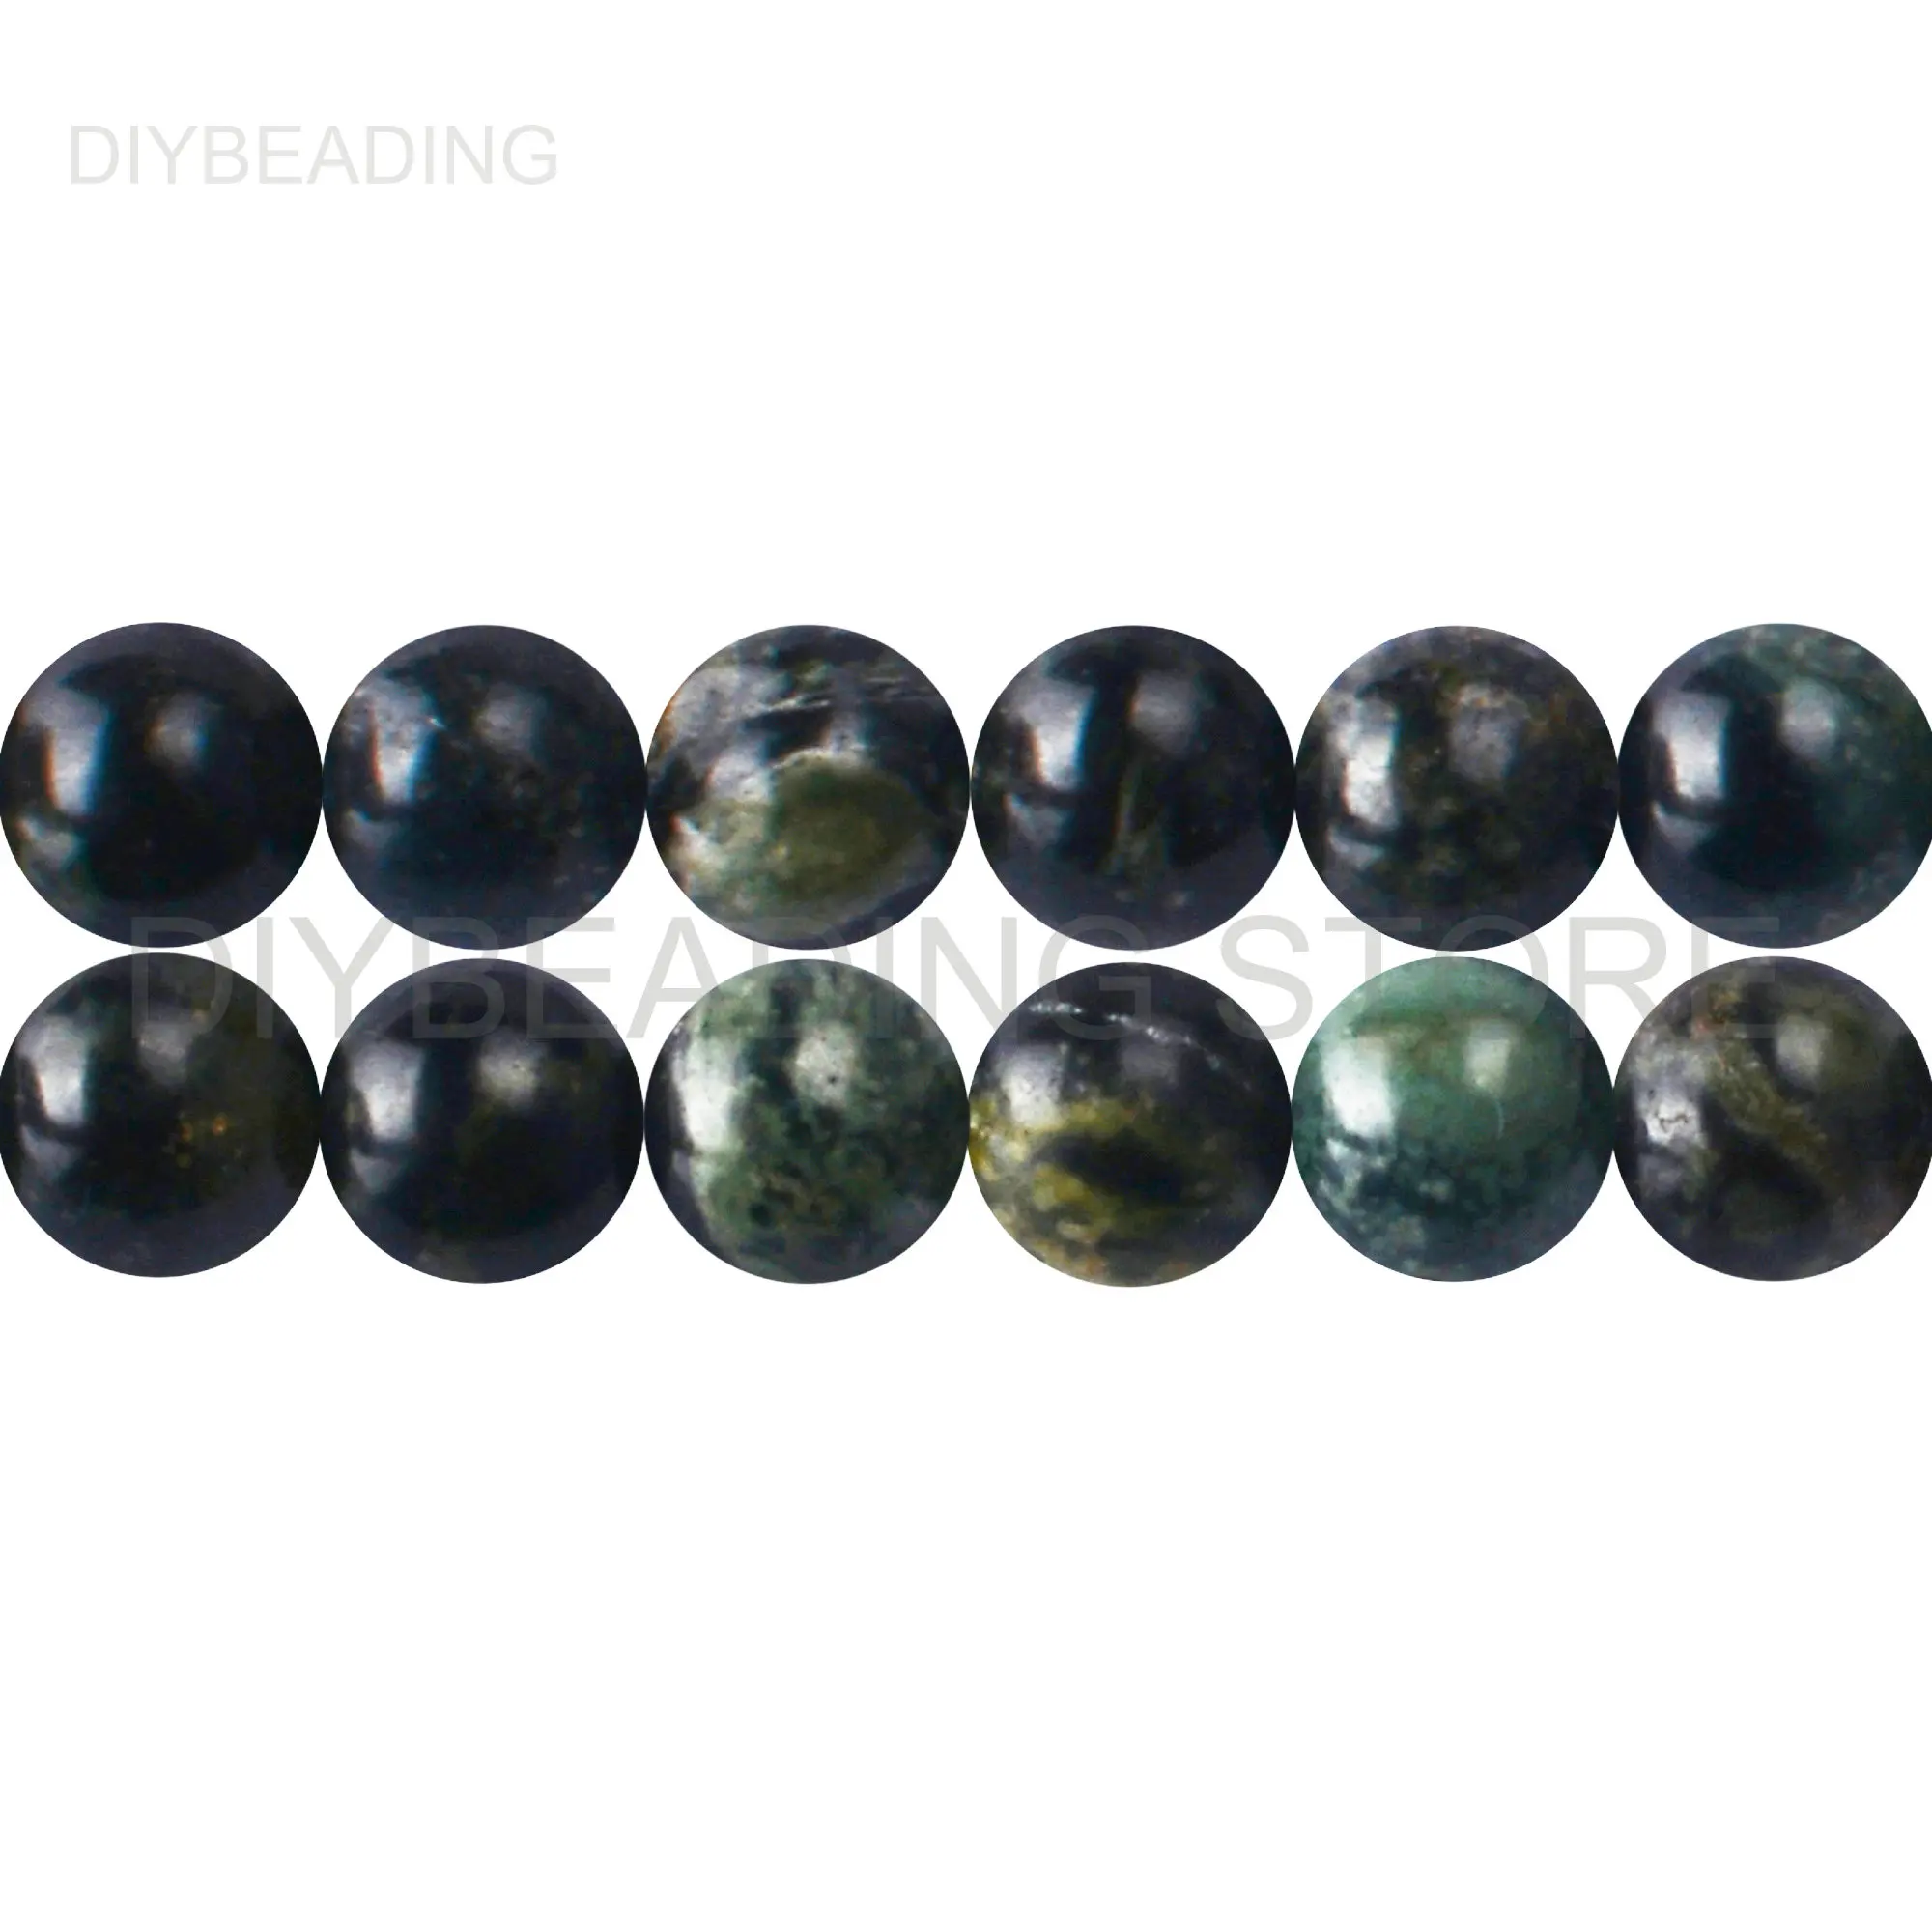 

Drilled Beads with 2 Holes Bulk Online Wholsale Natural Kambaba Jasper Semi Precious Stone Spacer Beads for Making Jewelry